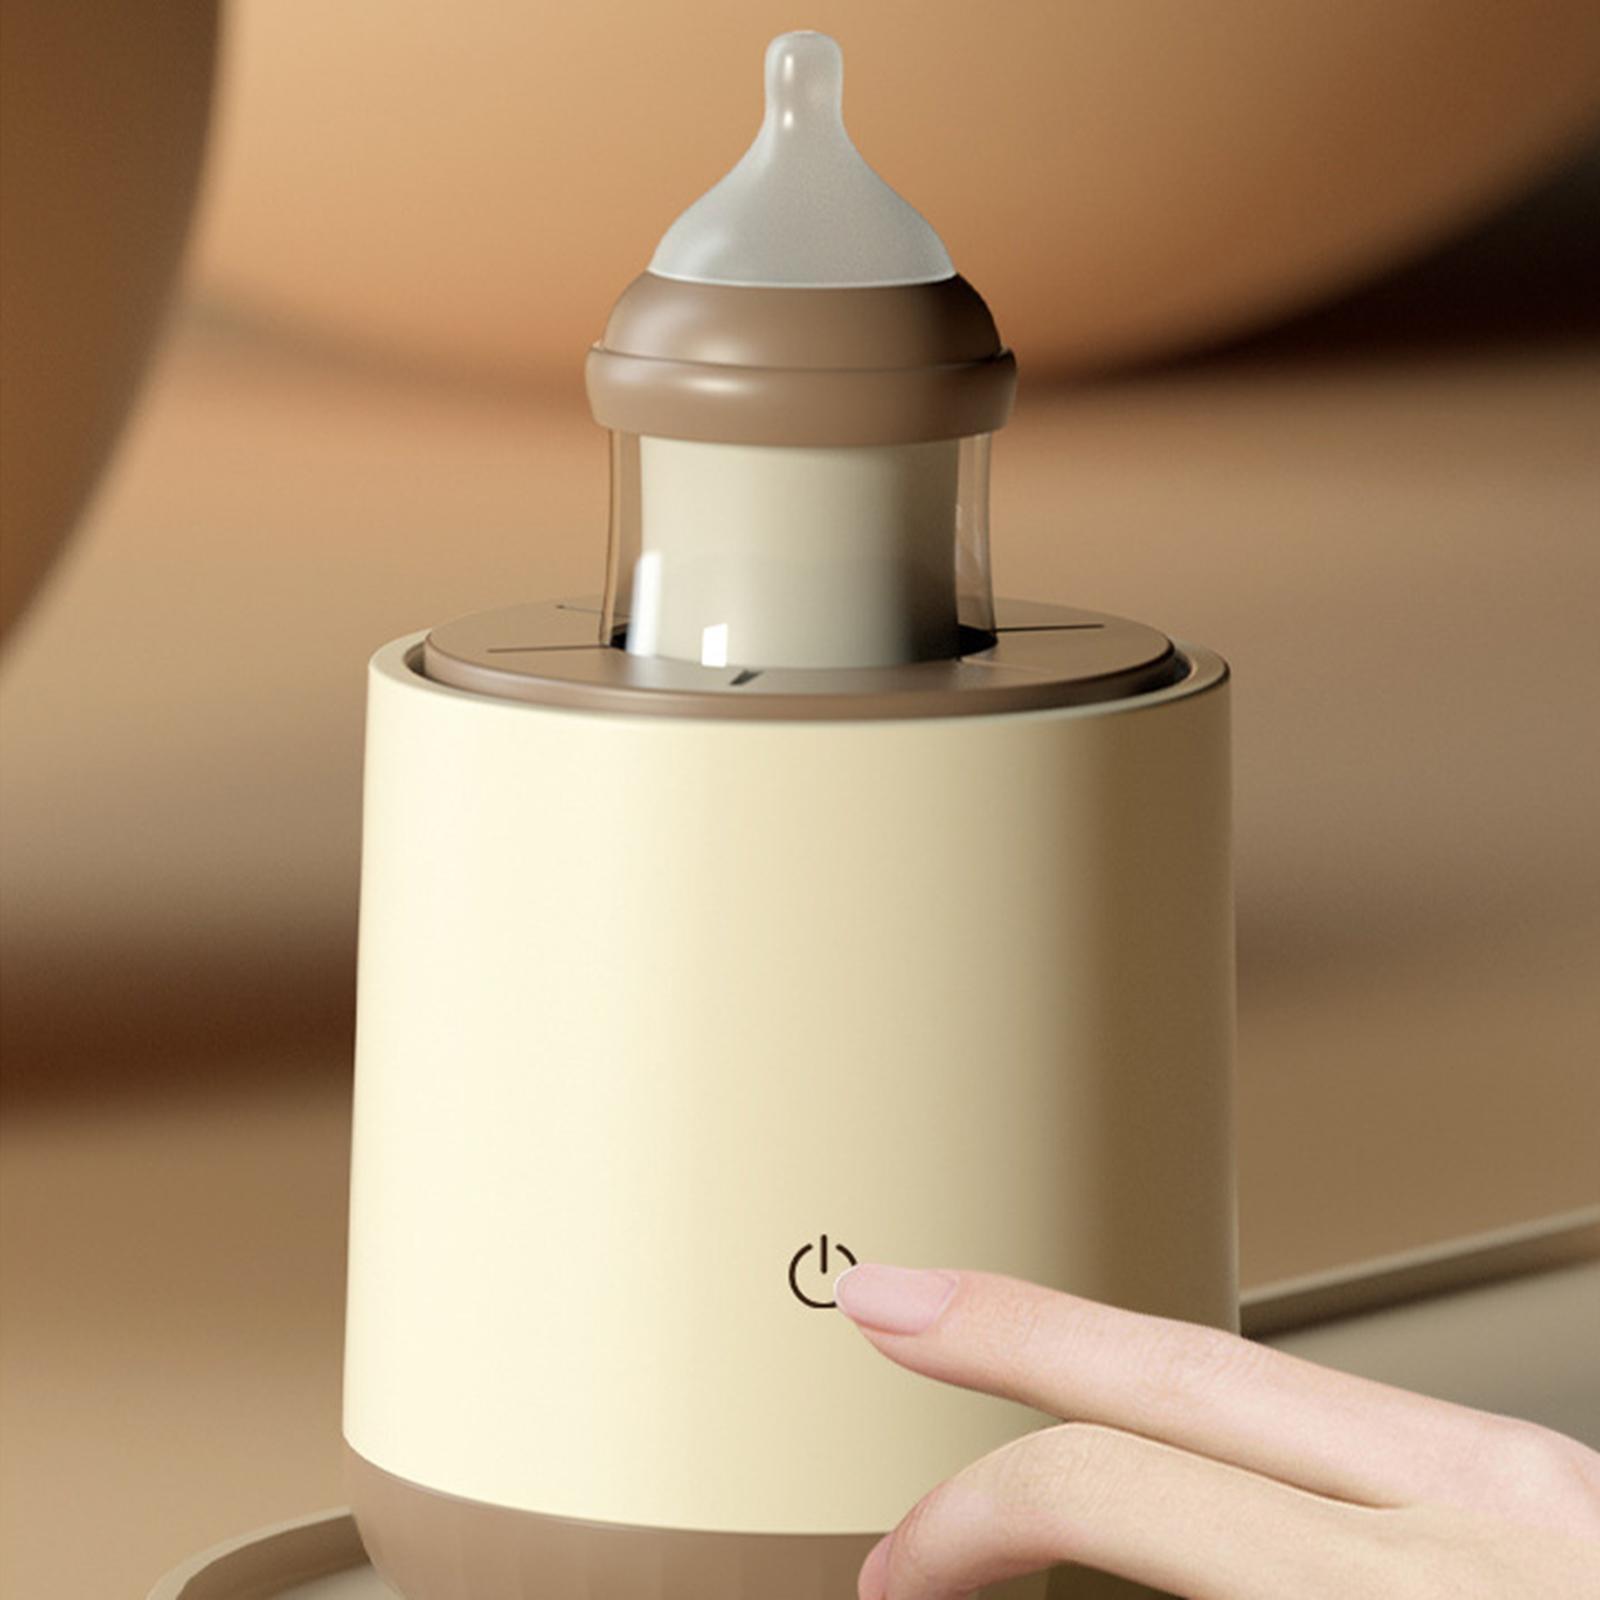 Baby Milk Powder Blender Newborn Feeding Milk Shaker Mixer USB Rechargeable Battery Tools for Bottle Babycare Mother Products